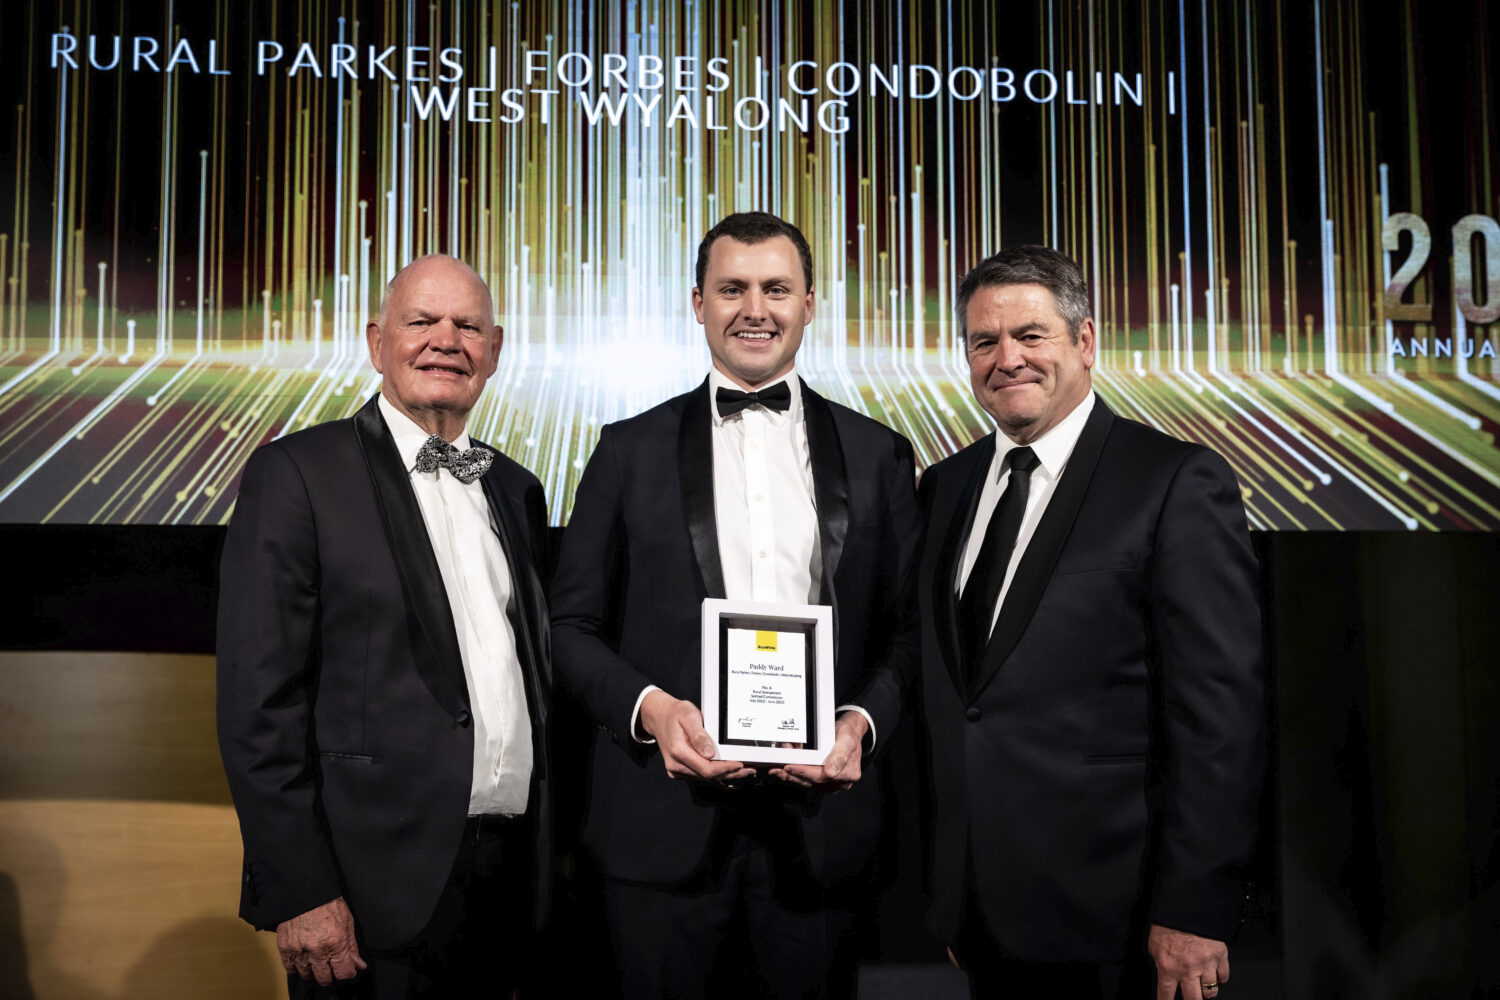 Paddy Ward (CENTRE), of Ray White Parkes, Forbes, Condobolin, West Wyalong, was ranked the number six salesperson in the country at the recent Ray White Rural annual awards. Image Contributed.